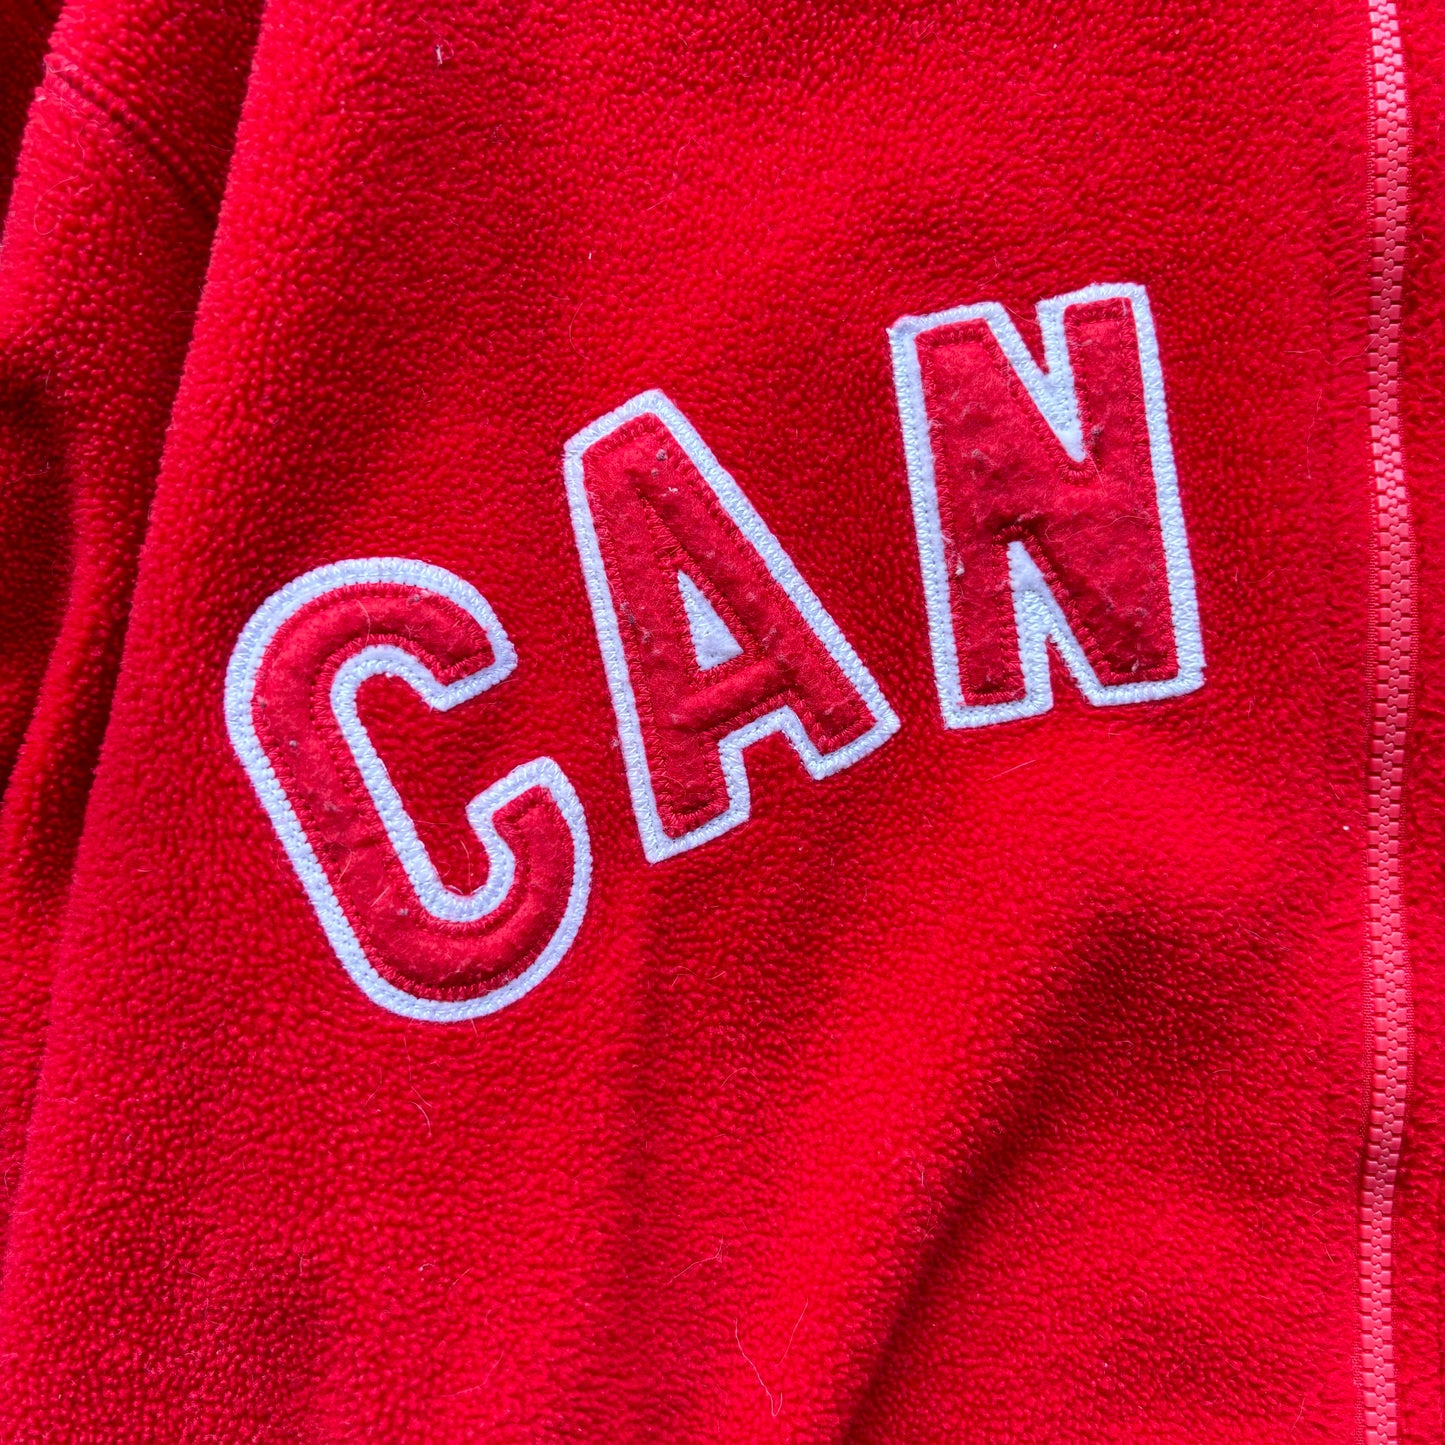 Club Hollywood Canada Red 'Canada' Zip Up Fleece [Large]